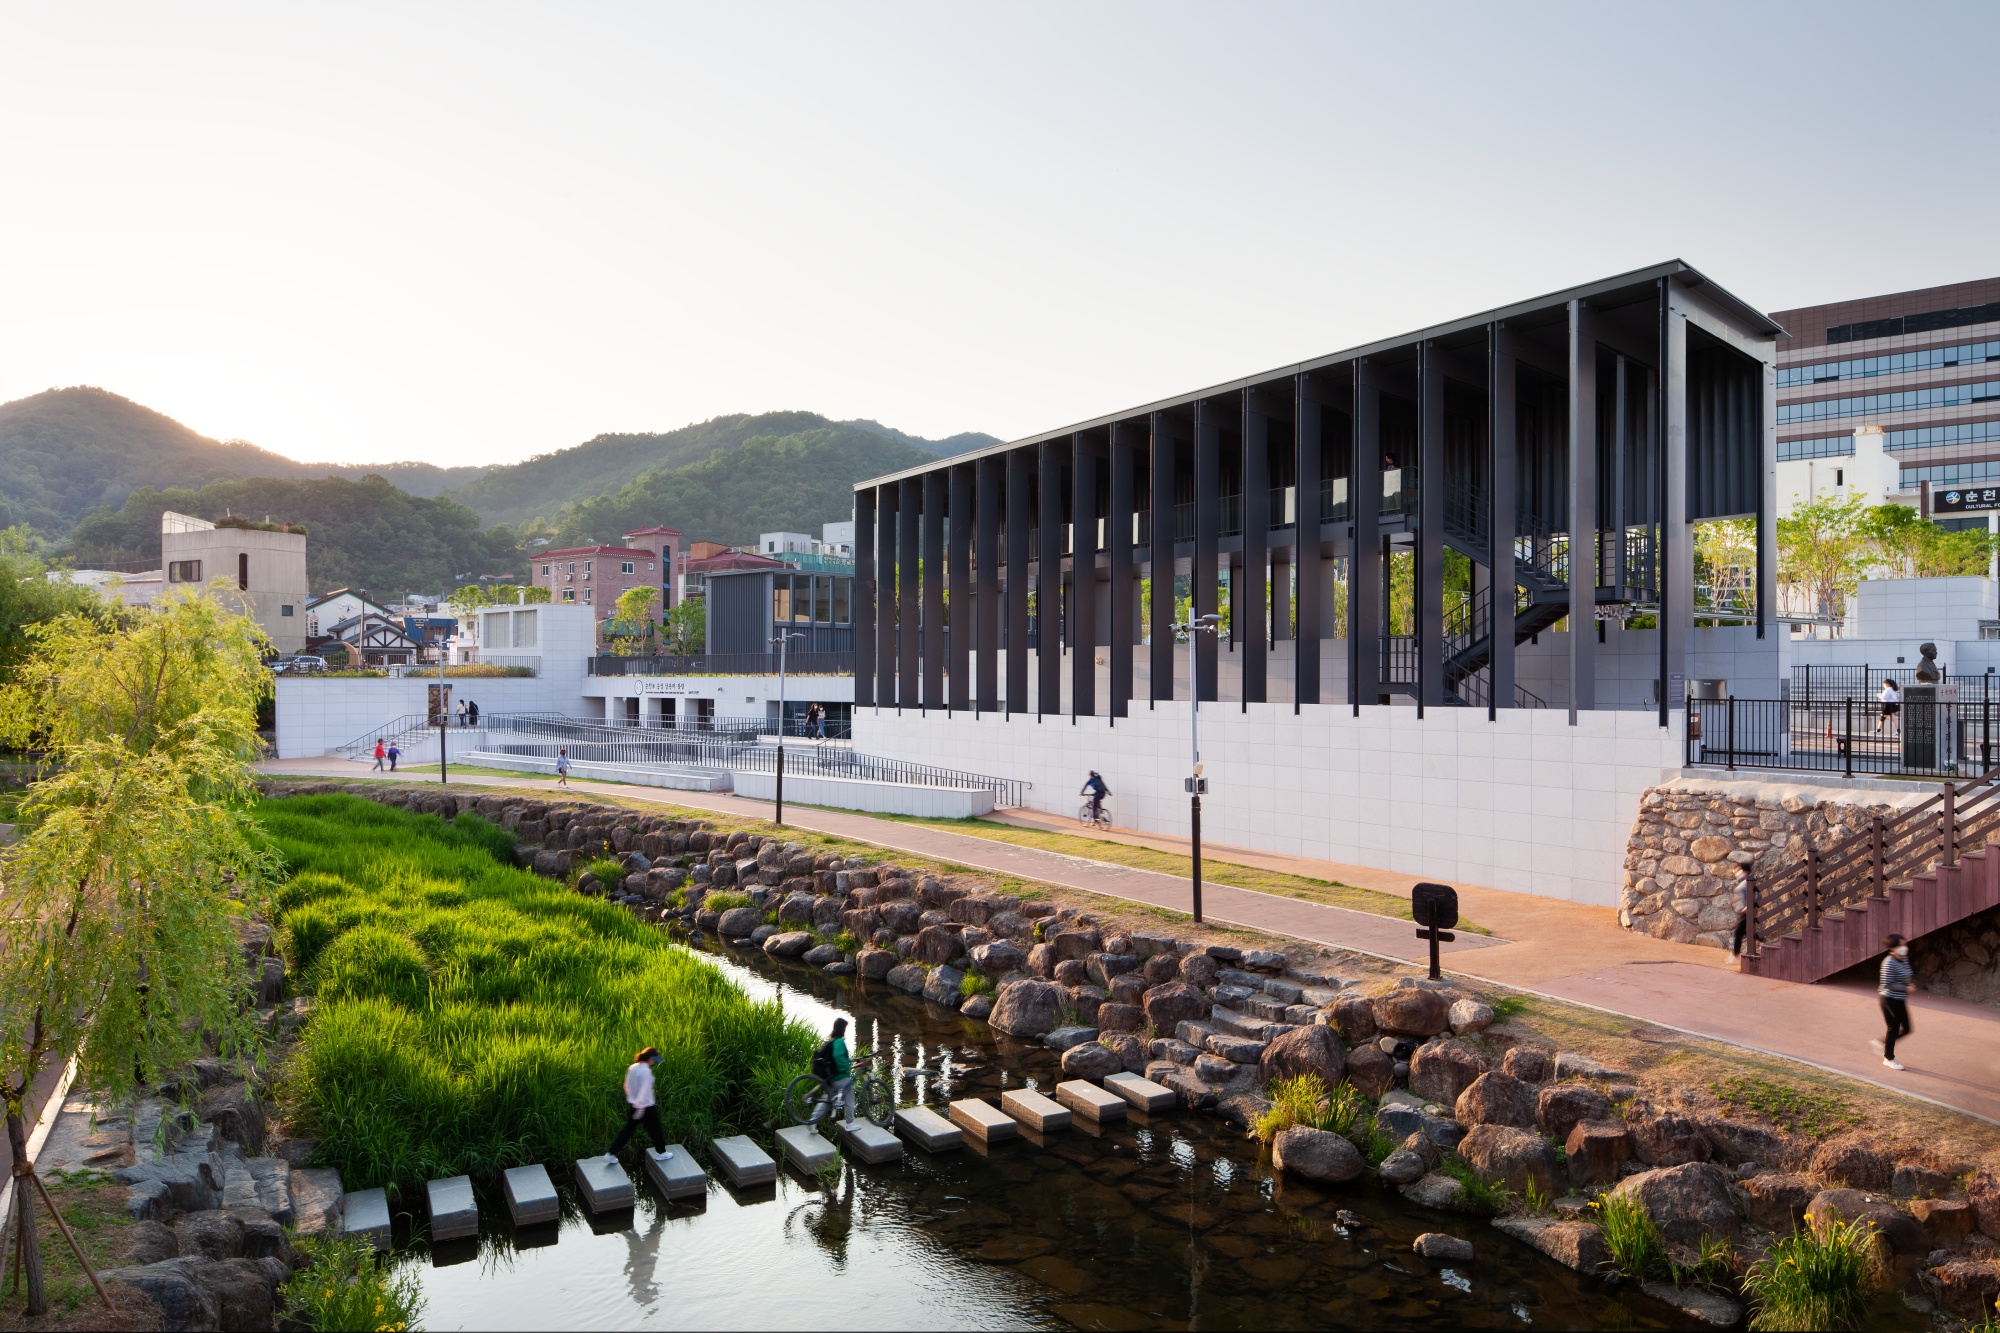 The Hidden Cloister: Winning Competition entry for Suncheon Art Platform, by Studio MADe 18